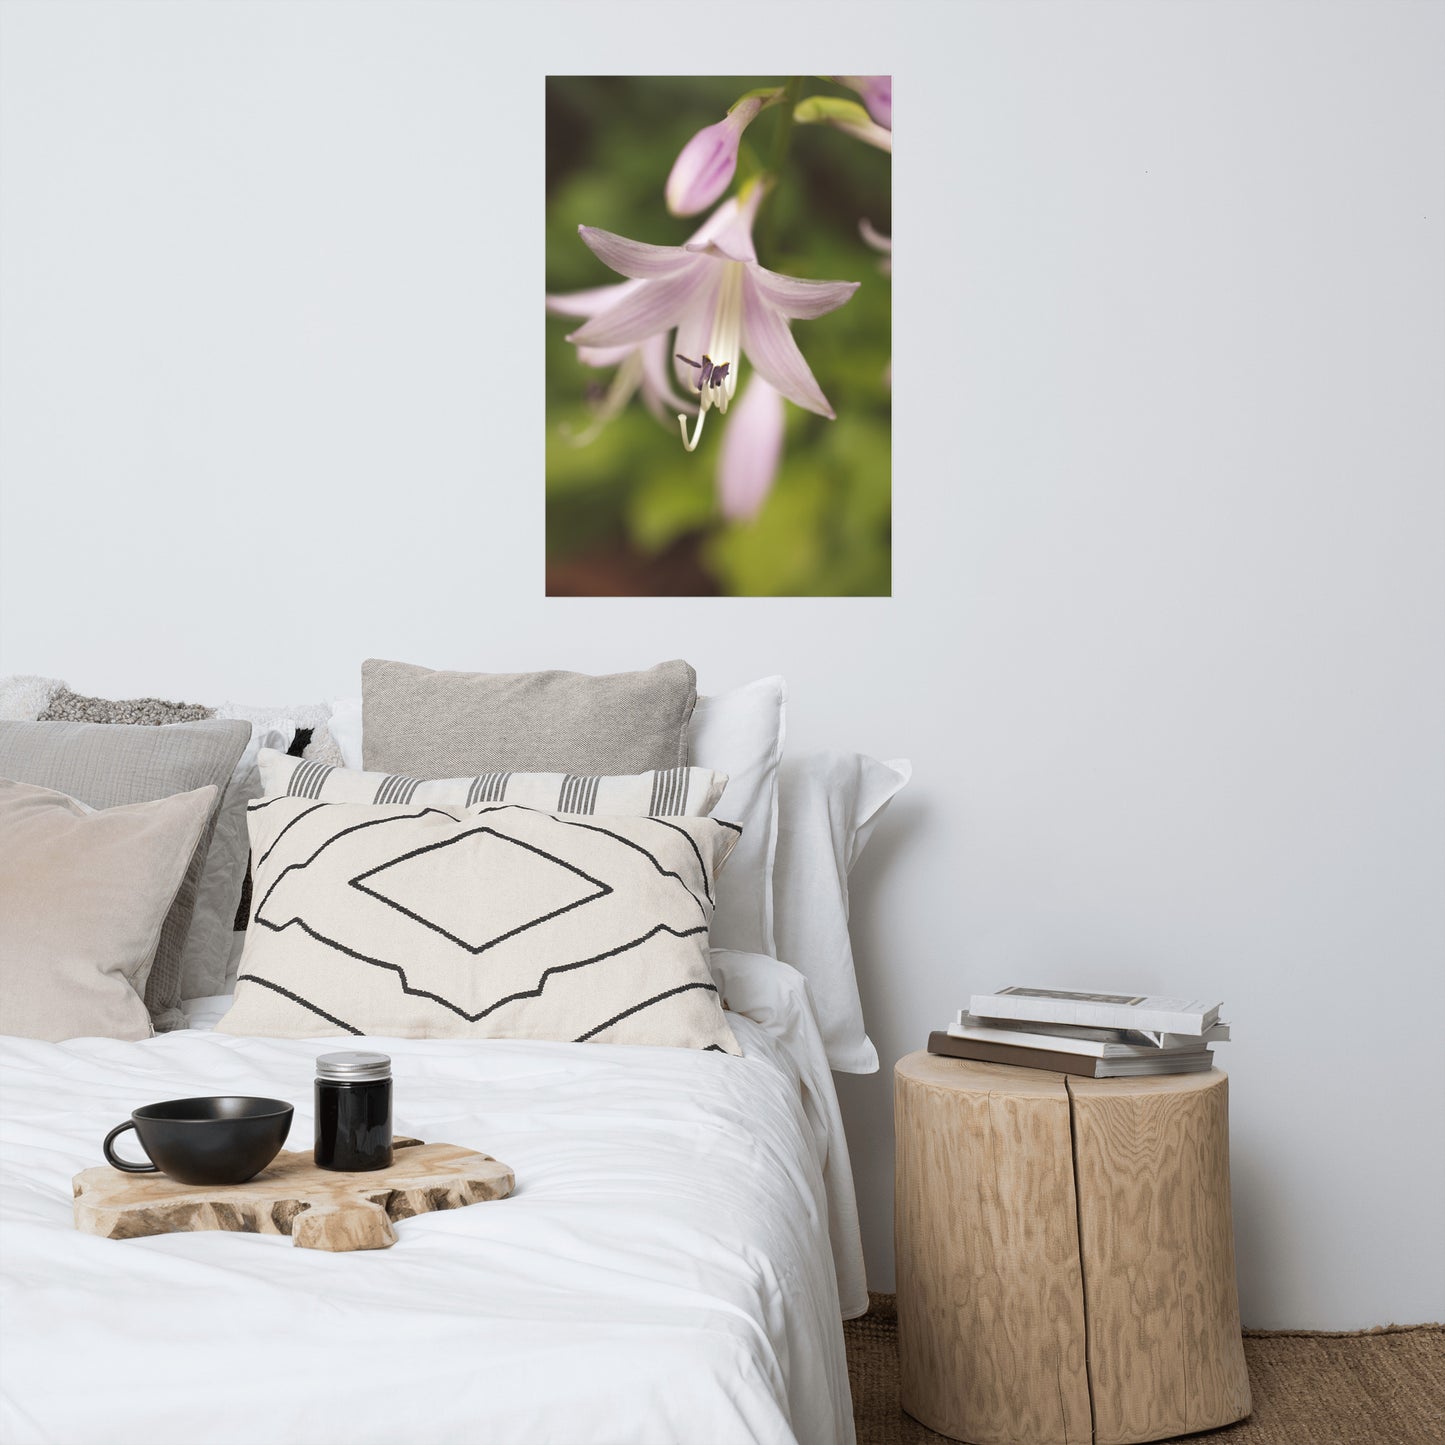 Softened Hosta Bloom Floral Nature Photo Loose Unframed Wall Art Prints